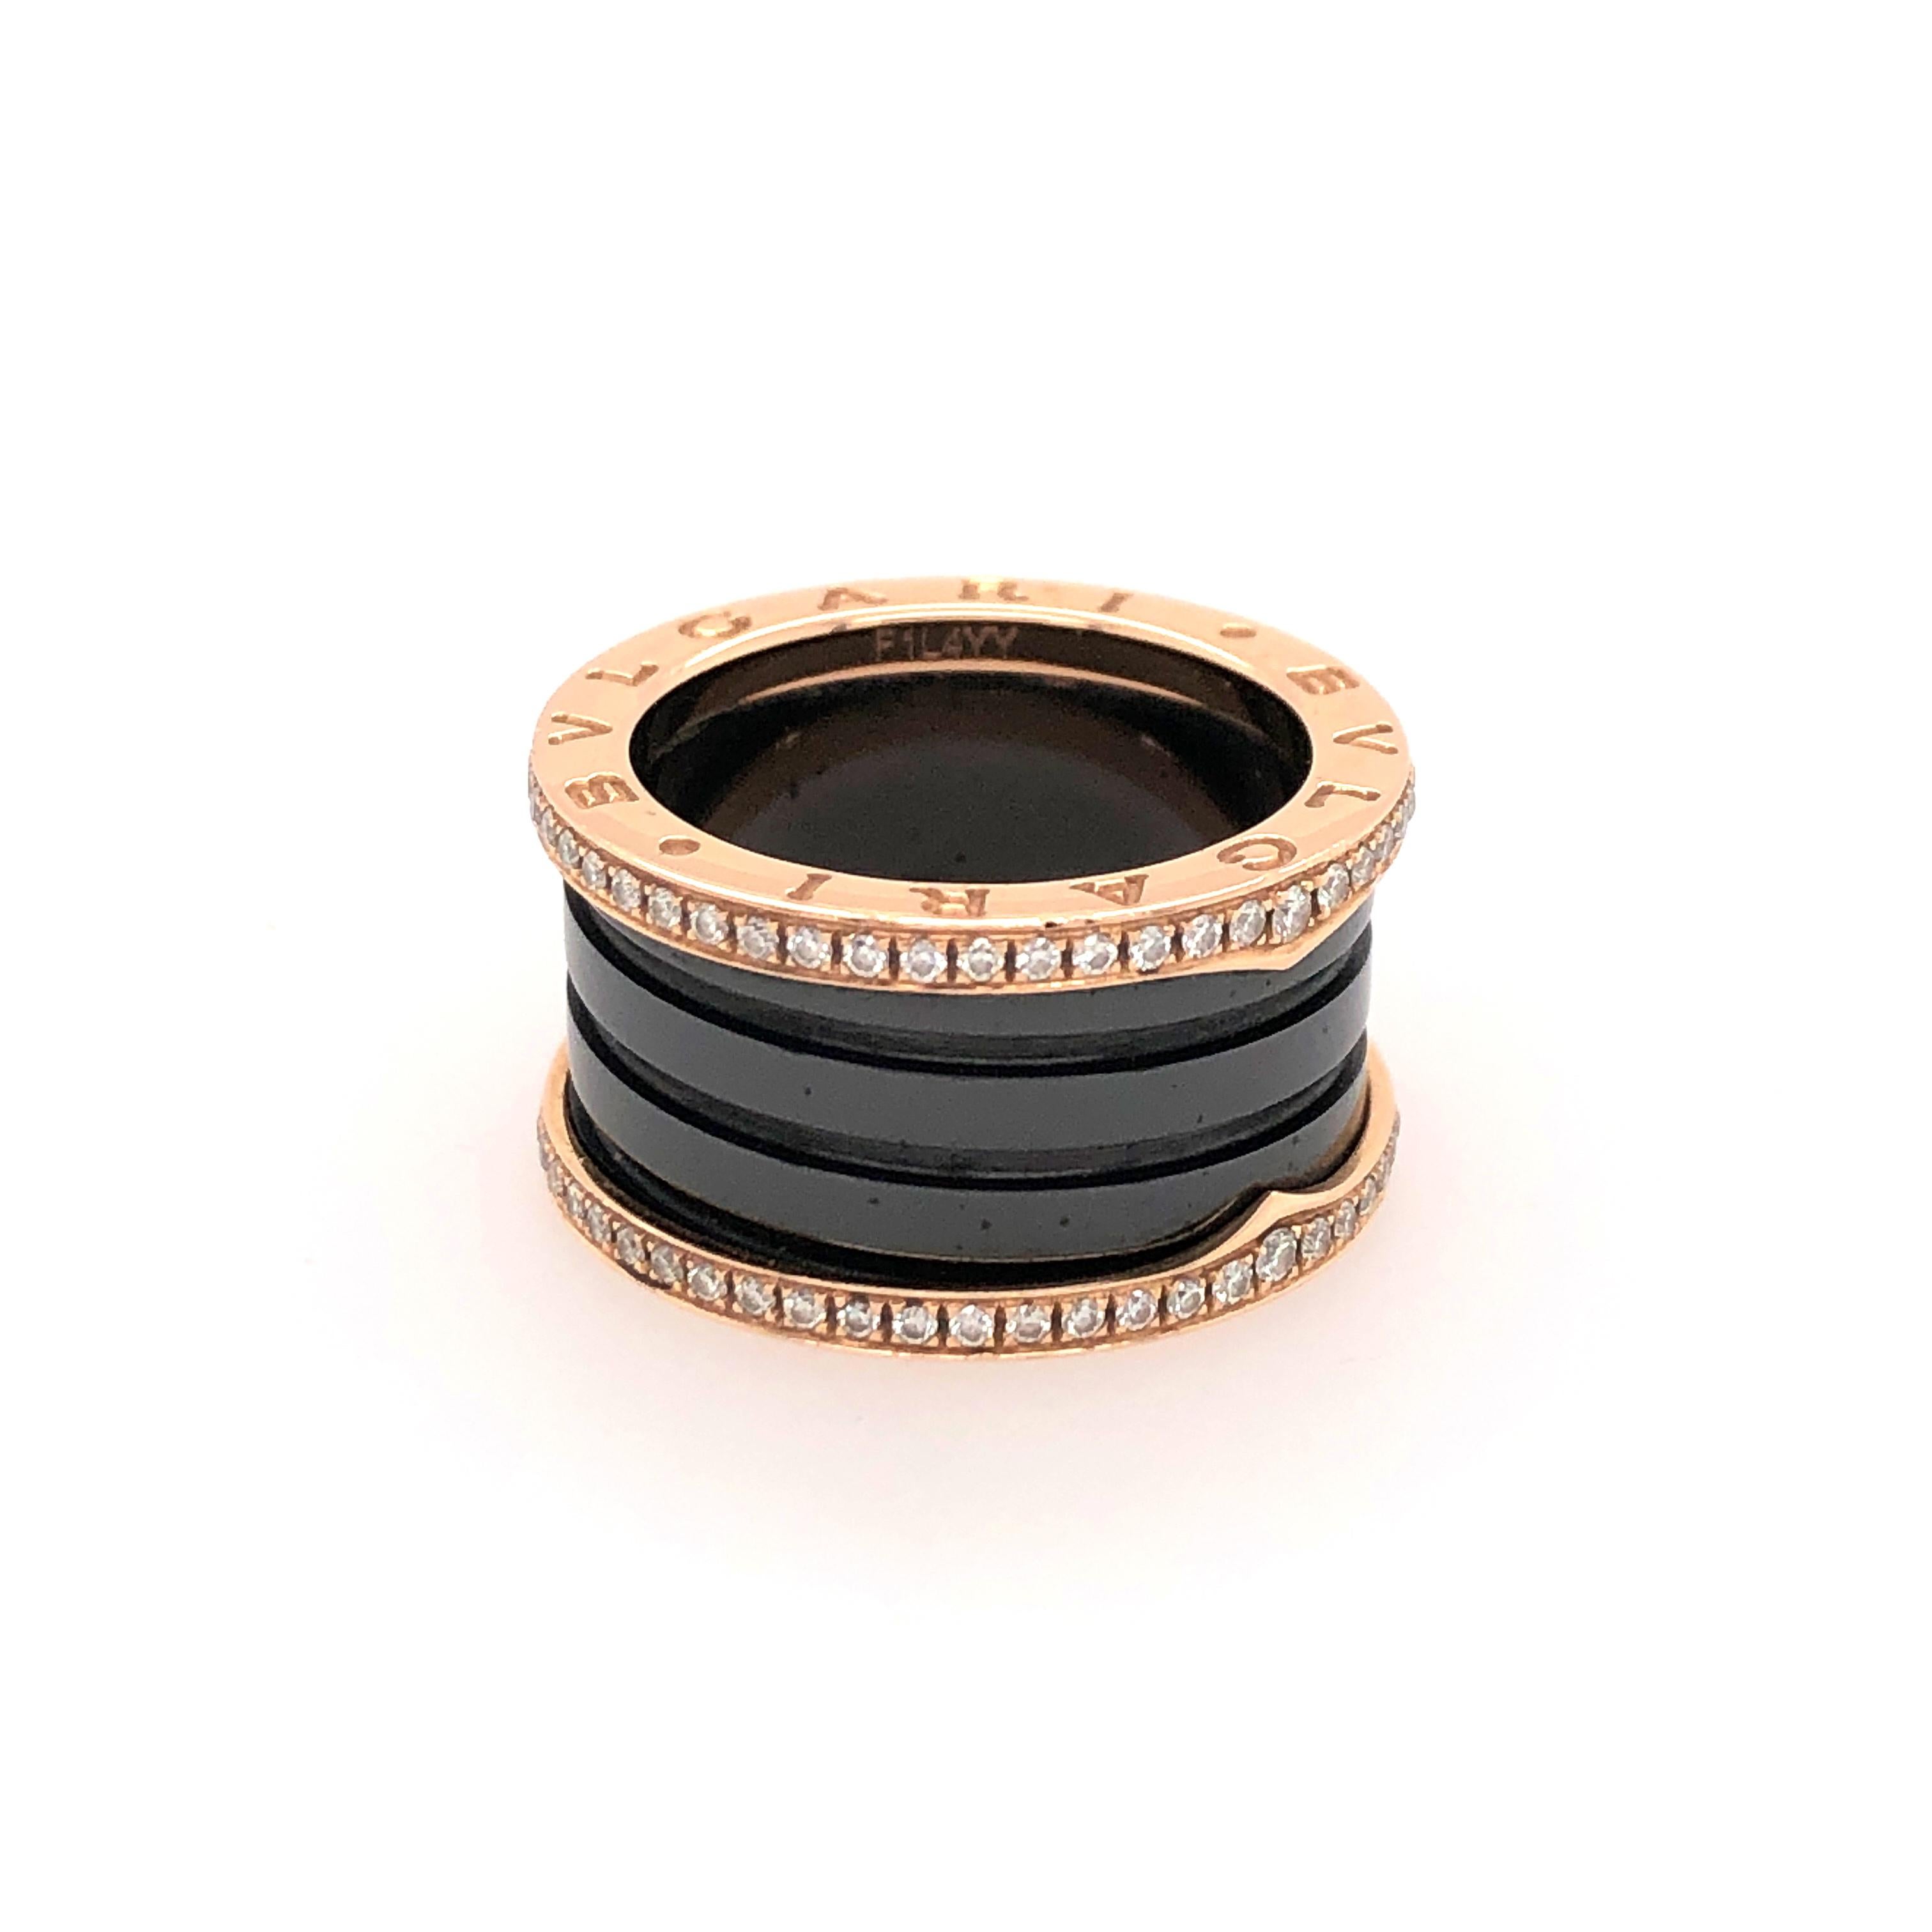 Bold and beautiful, Bvlgari's B.zero1 18K rose gold, black ceramic, and pavé diamond ring adds an edgy sparkle to your black leather jumpsuit (wink, wink). Ok, I might be wearing a black leather jacket while typing this, but really, this ring adds a